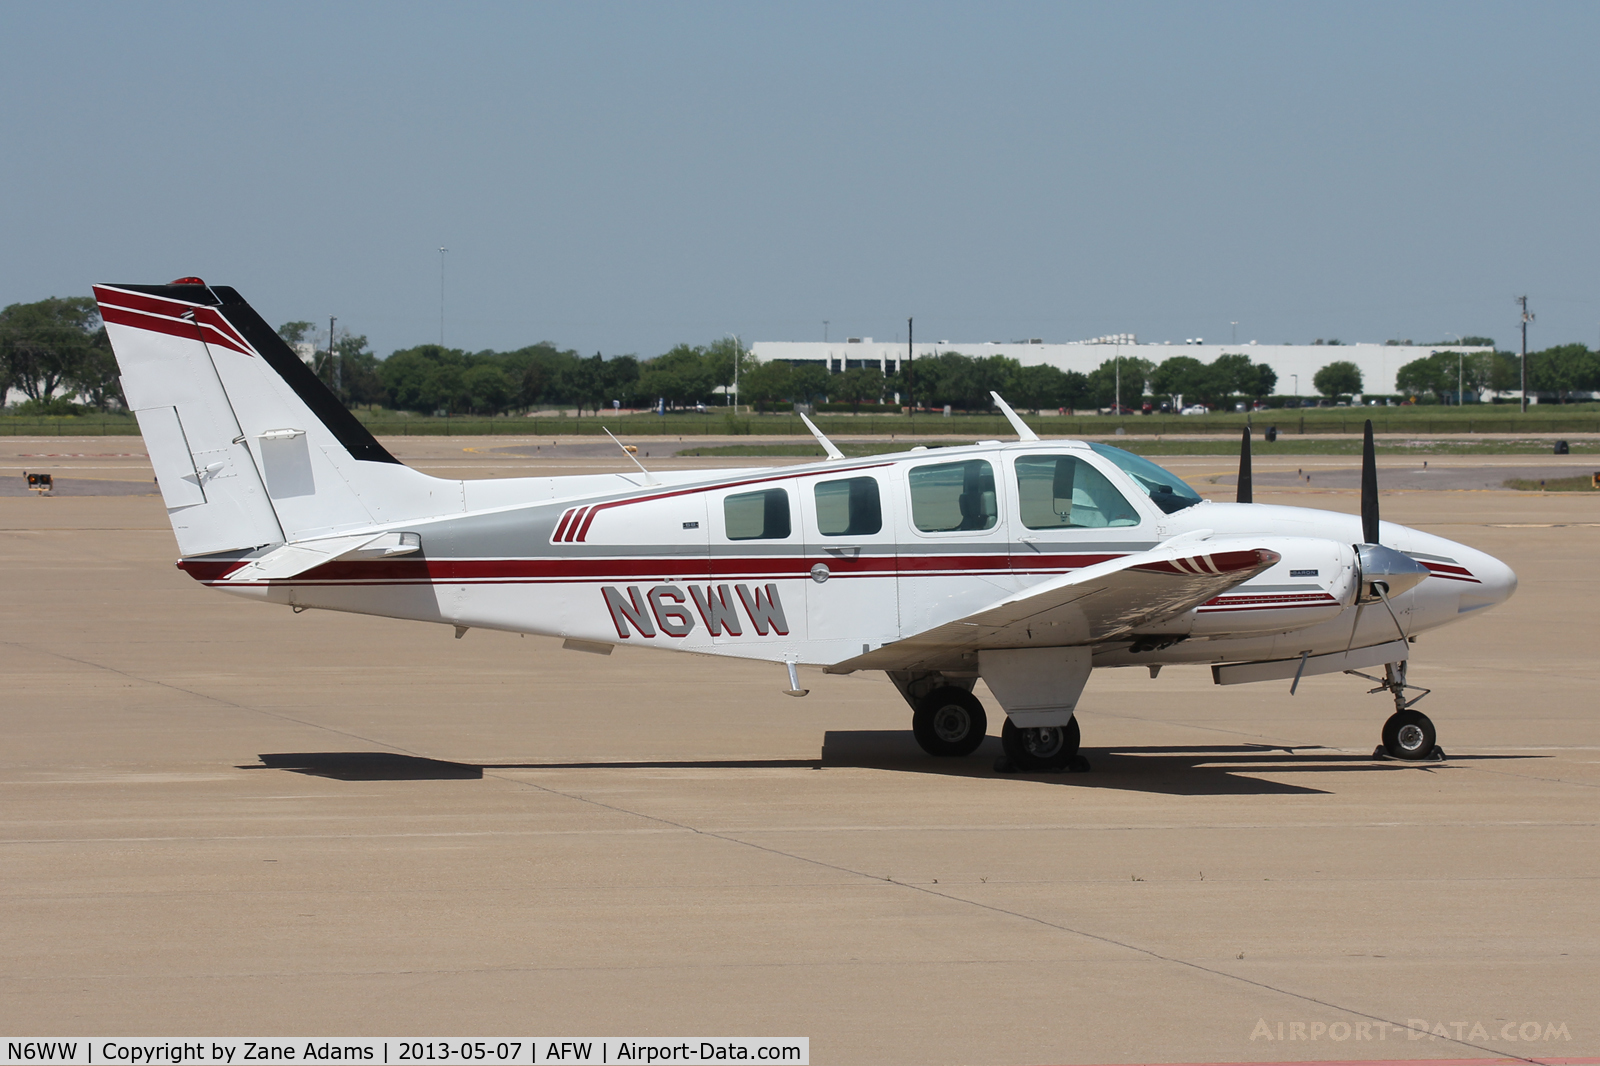 N6WW, 1973 Beech 58 Baron C/N TH-358, At Alliance Airport - Fort Worth, TX